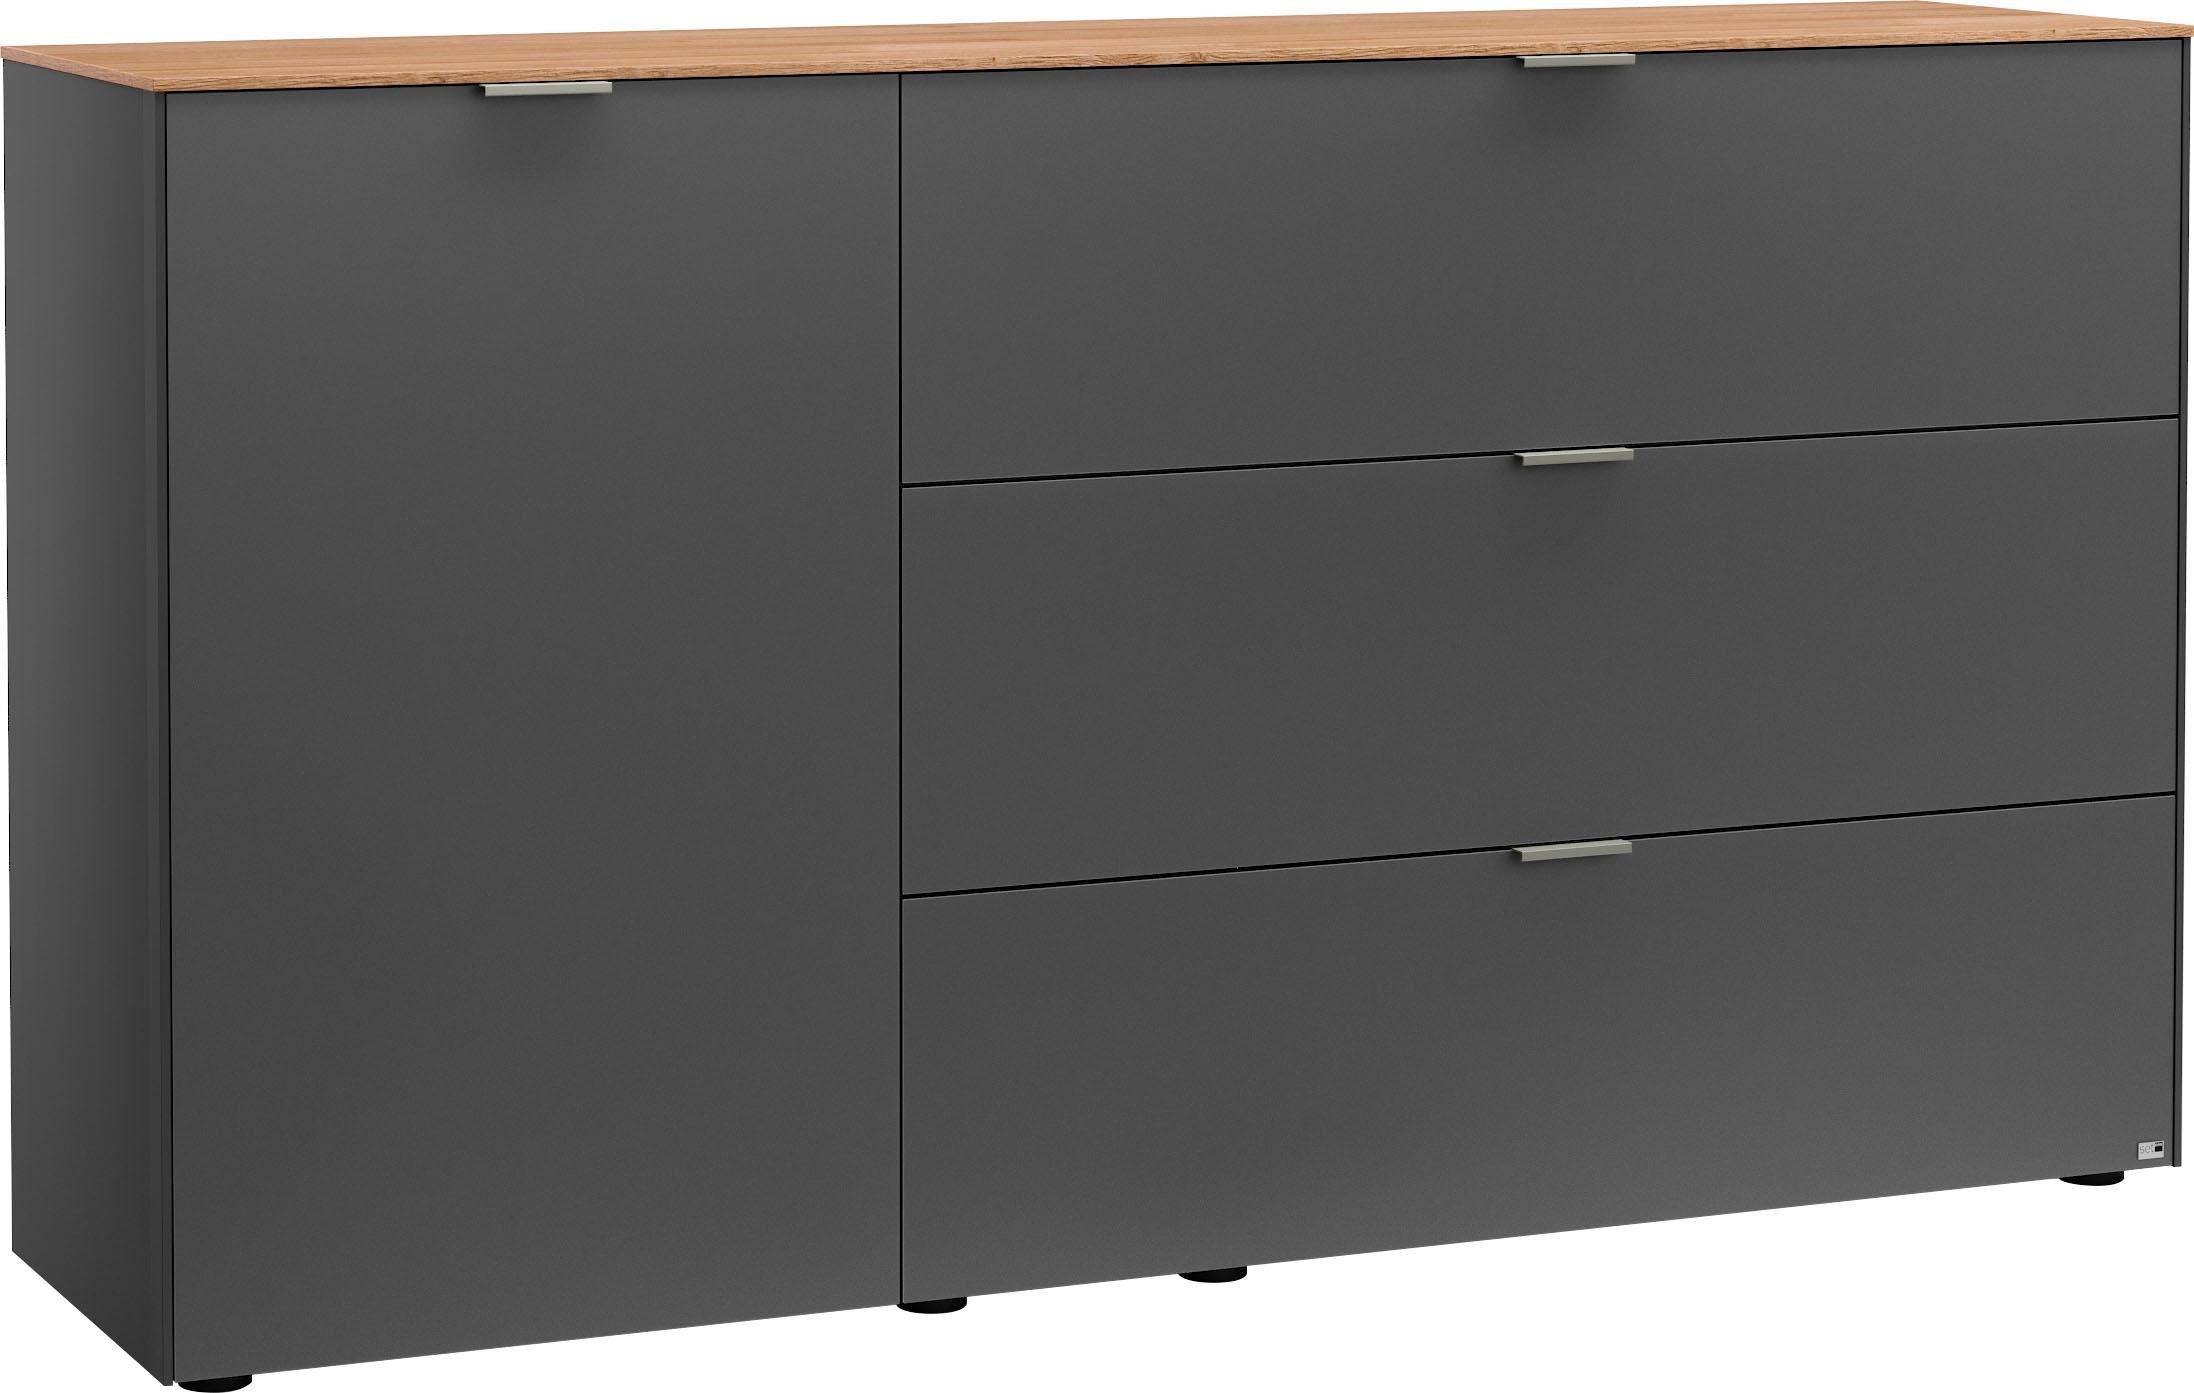 set one by Musterring Sideboard »Chicago« kaufen | OTTO